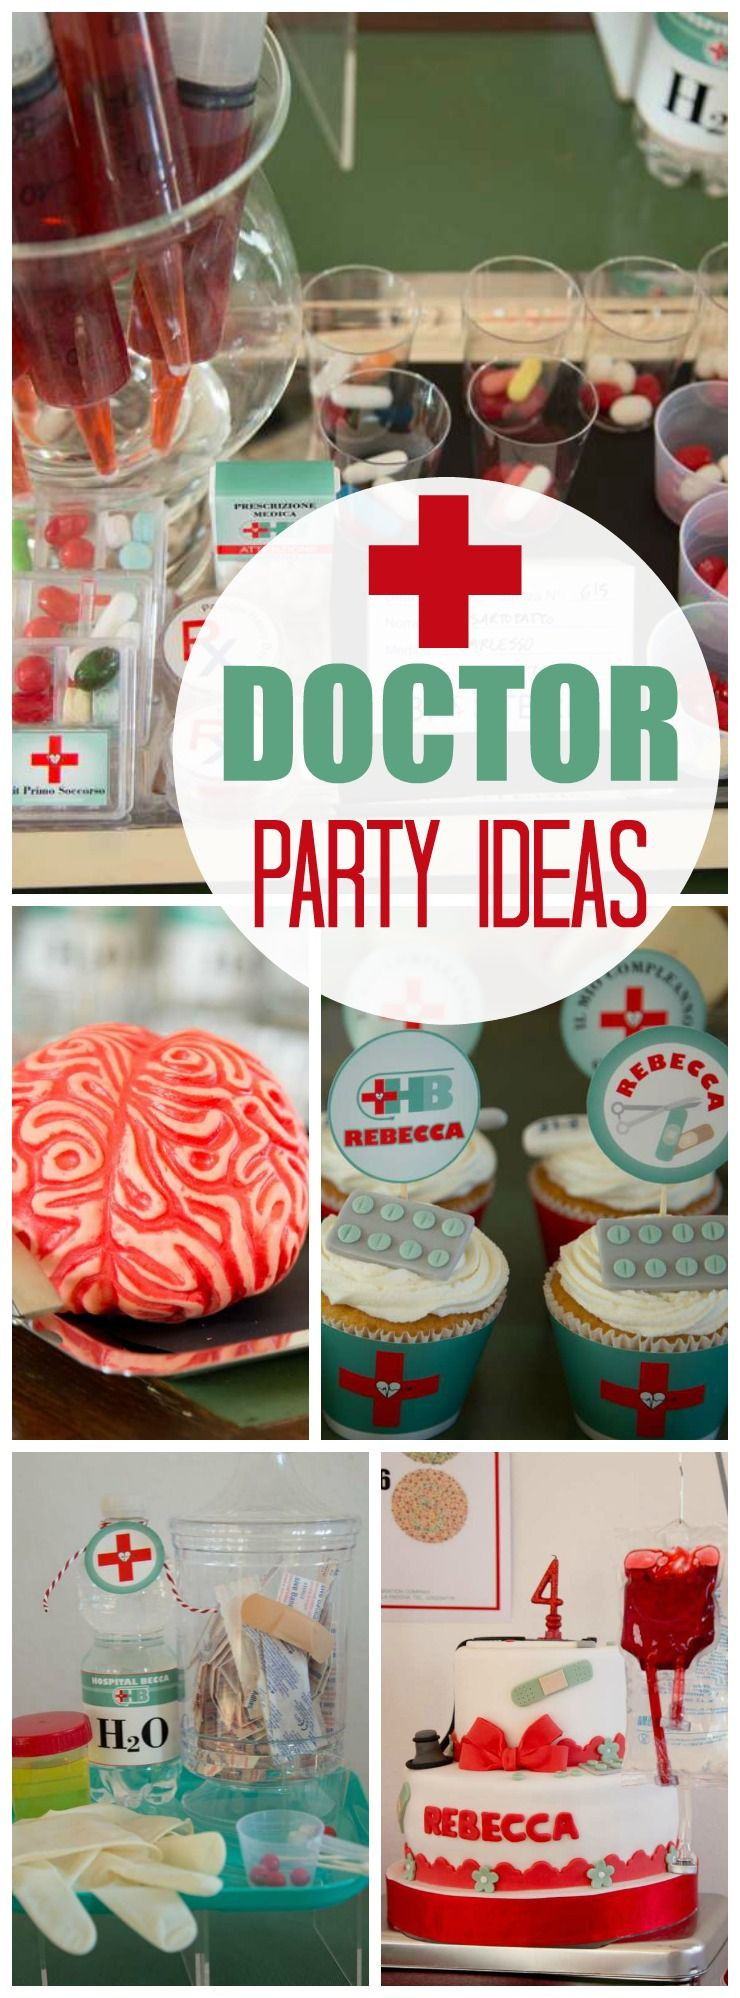 Doctor Graduation Party Ideas
 How fun is this amazing doctor party See more party ideas